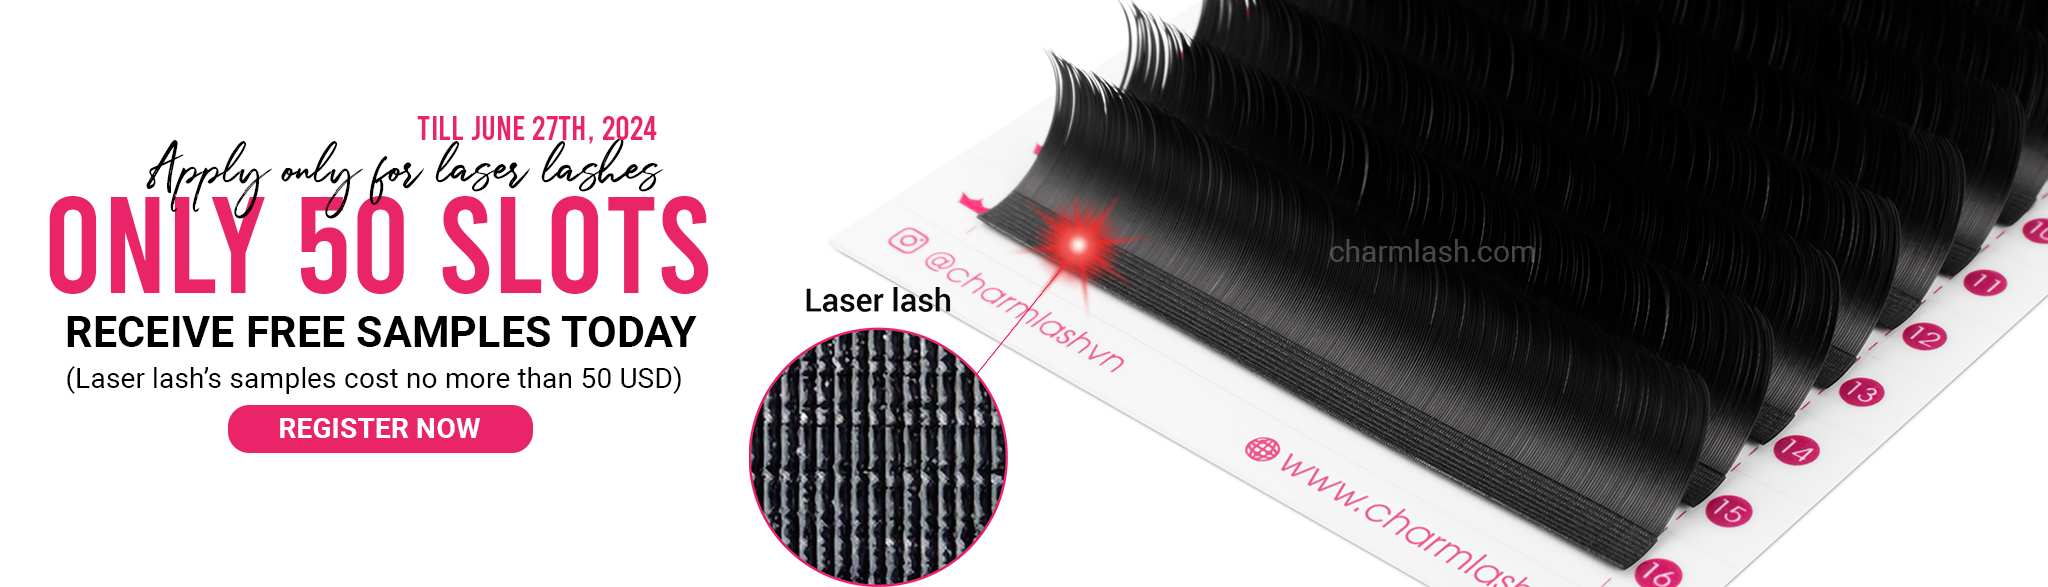 Laser lashes - Charmlash - a game-changer in the lash industry